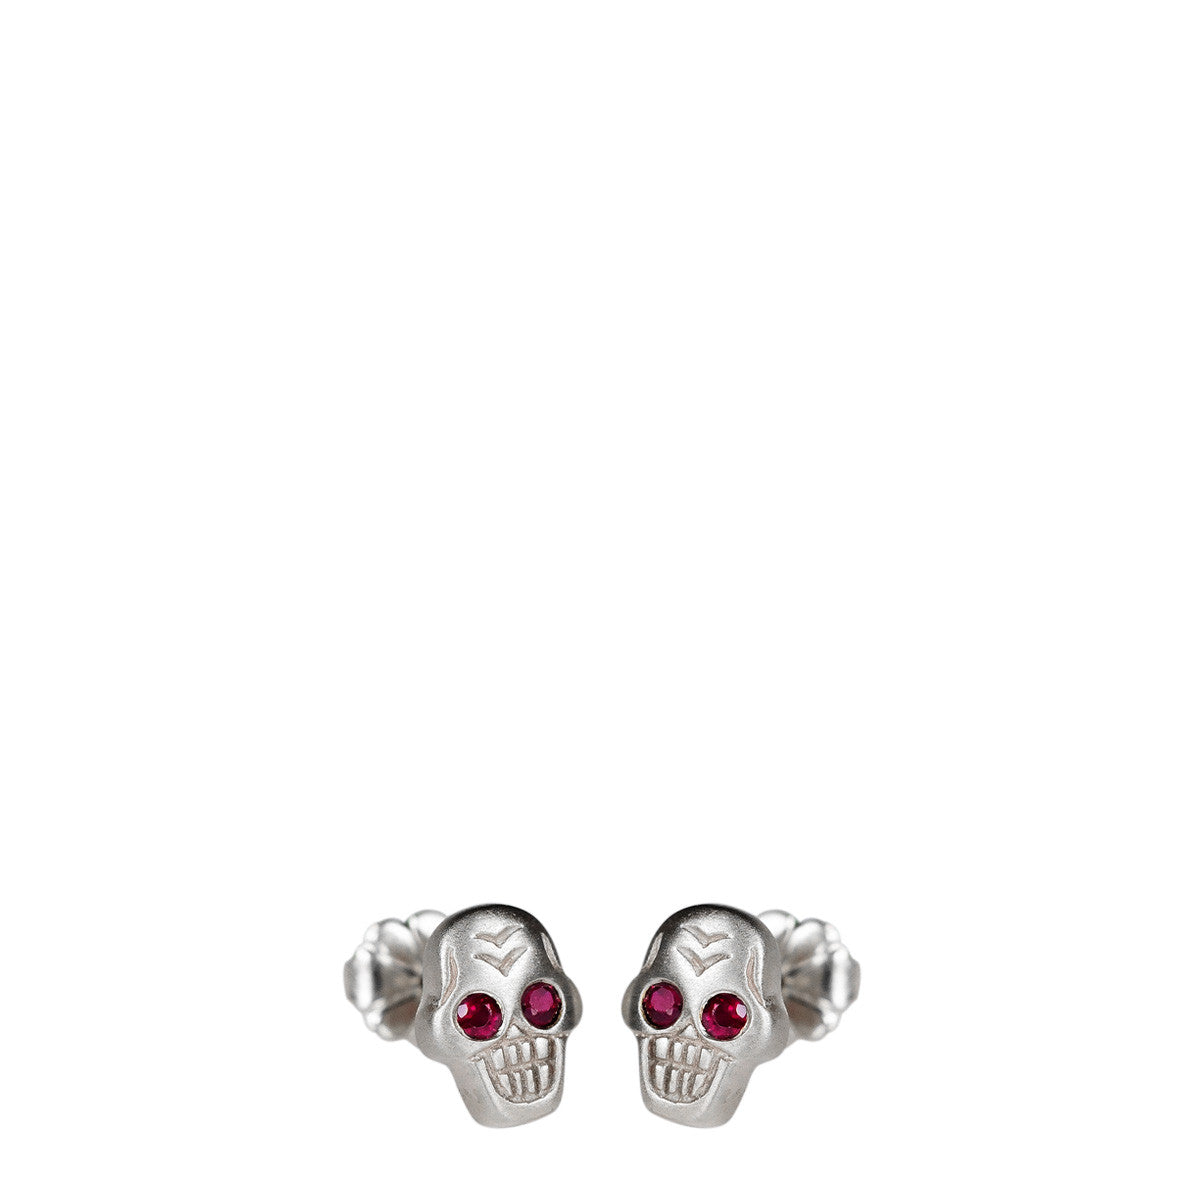 Sterling Silver Tiny Skull Stud Earrings with Ruby Eyes